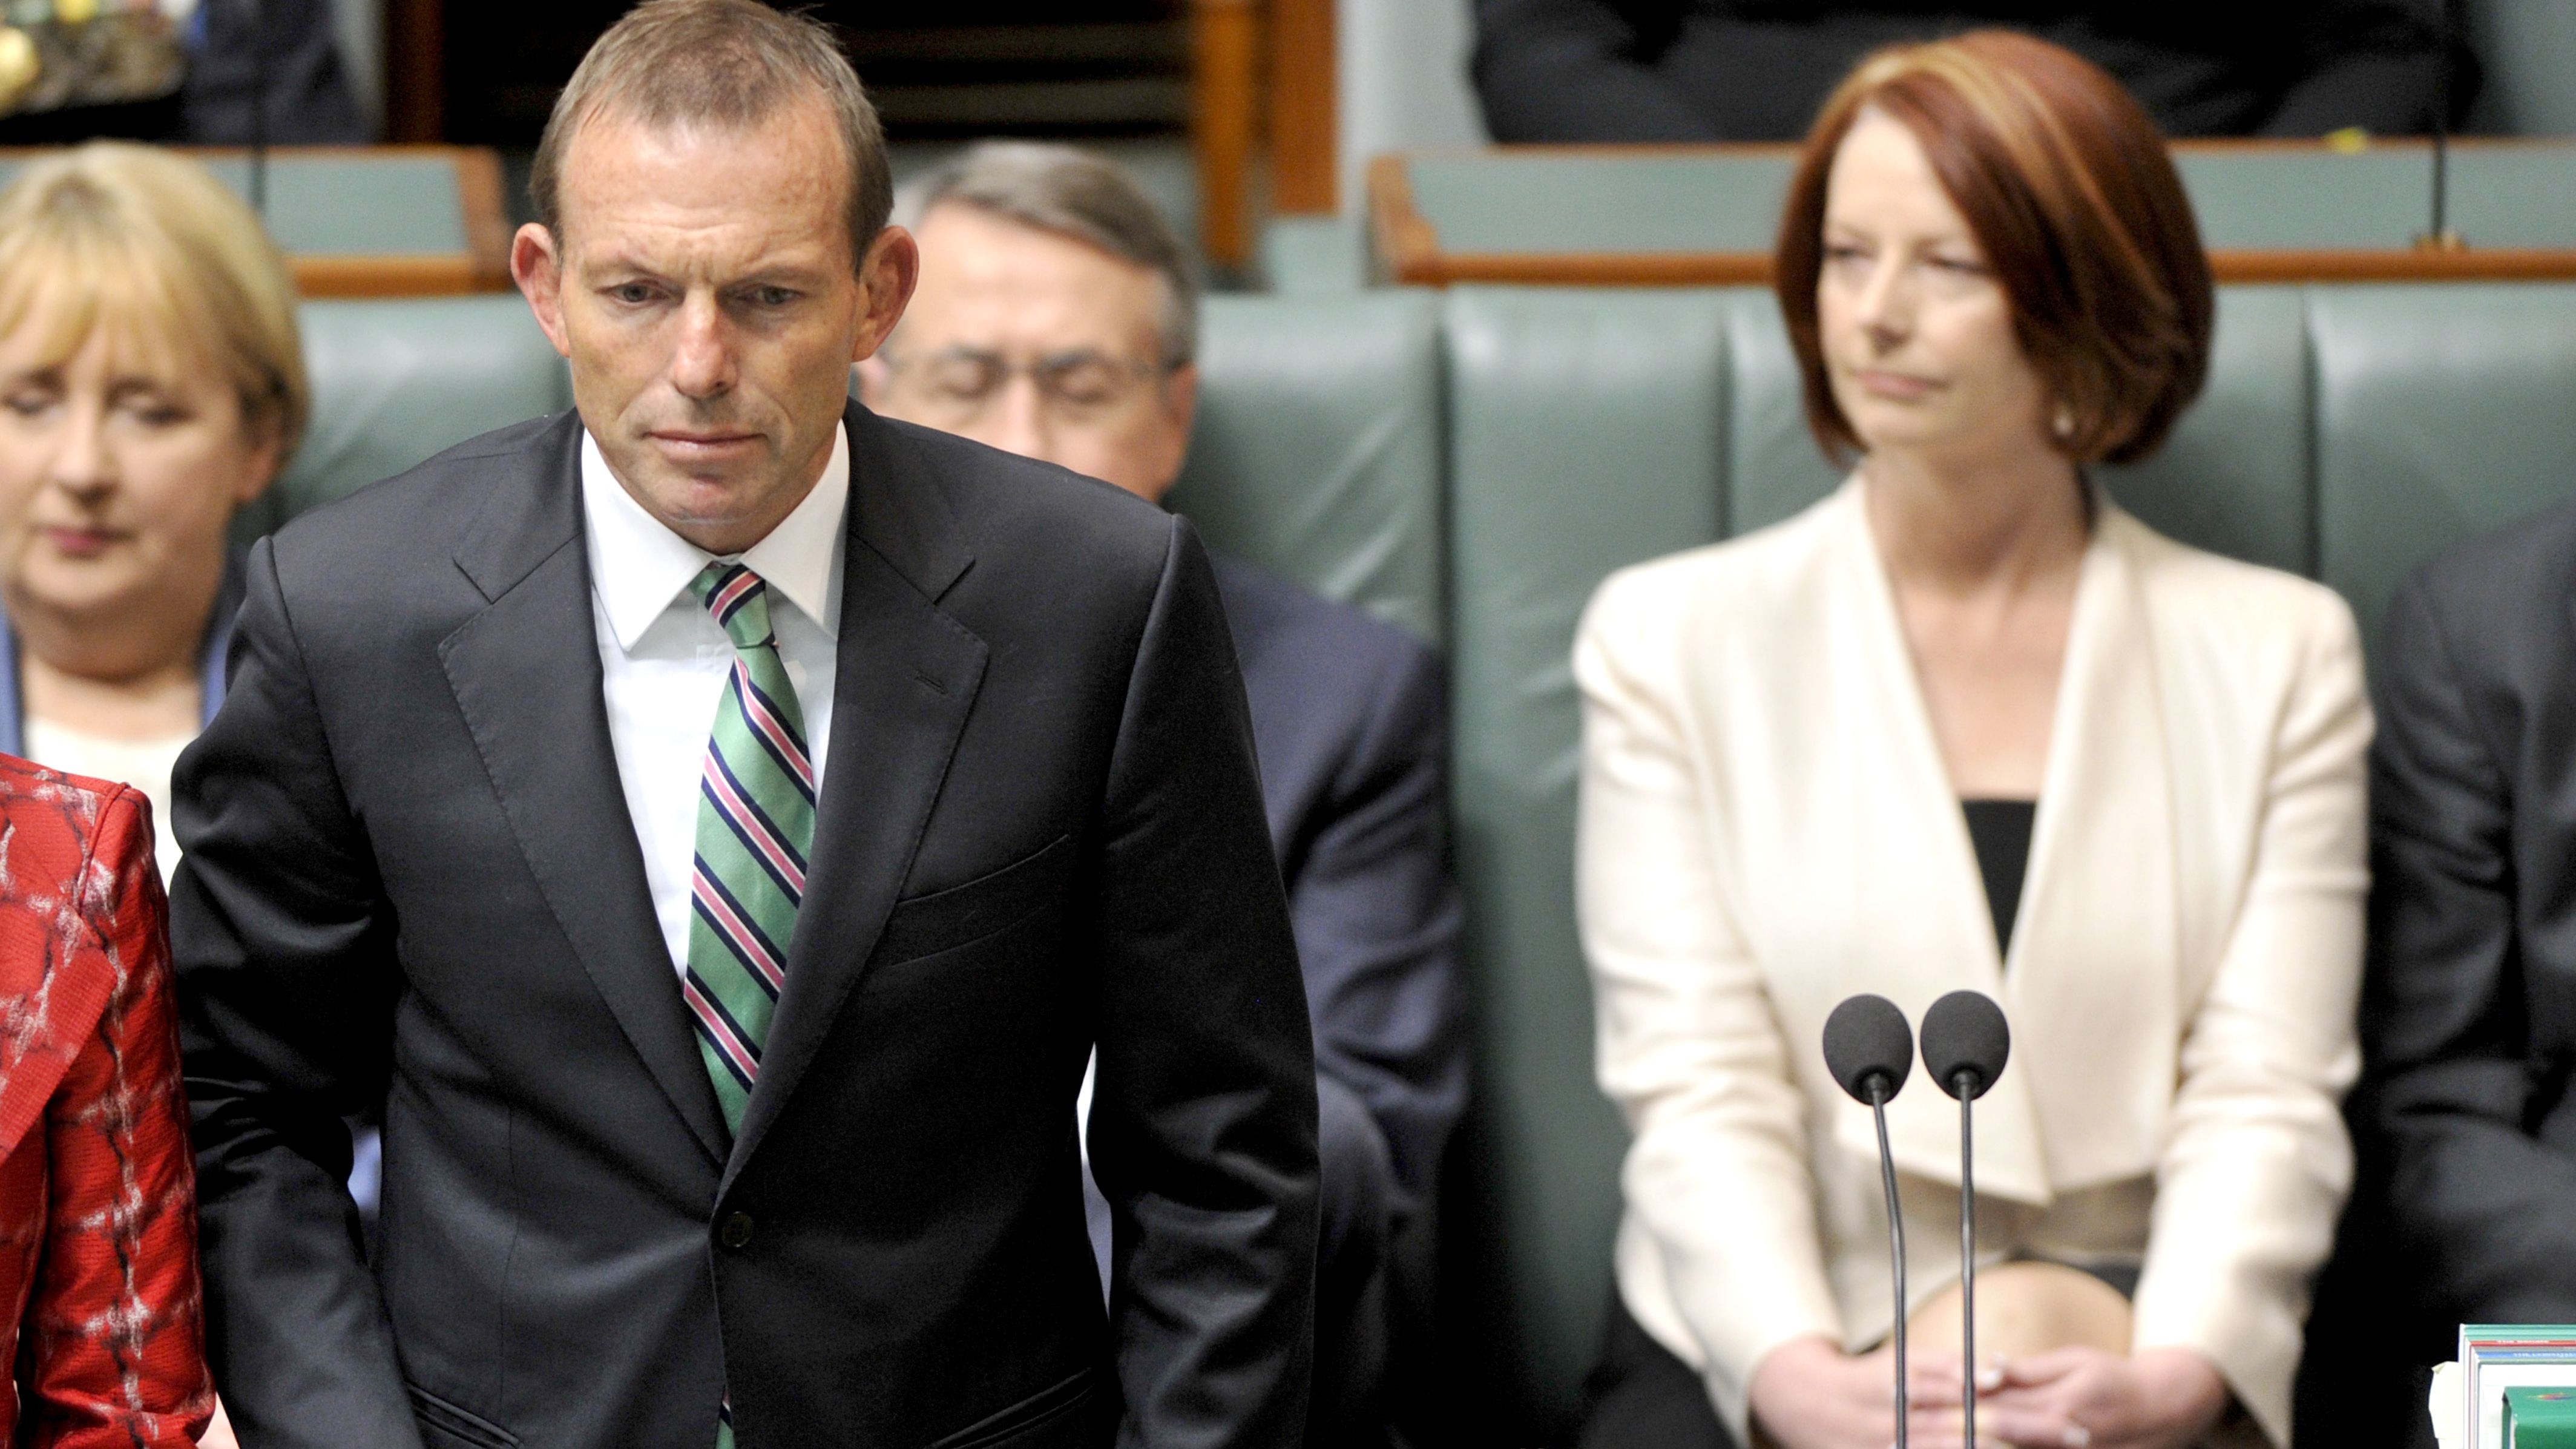 There was no love lost between Tony Abbott and former prime minister Julia Gillard seen here in parliament in 2010.